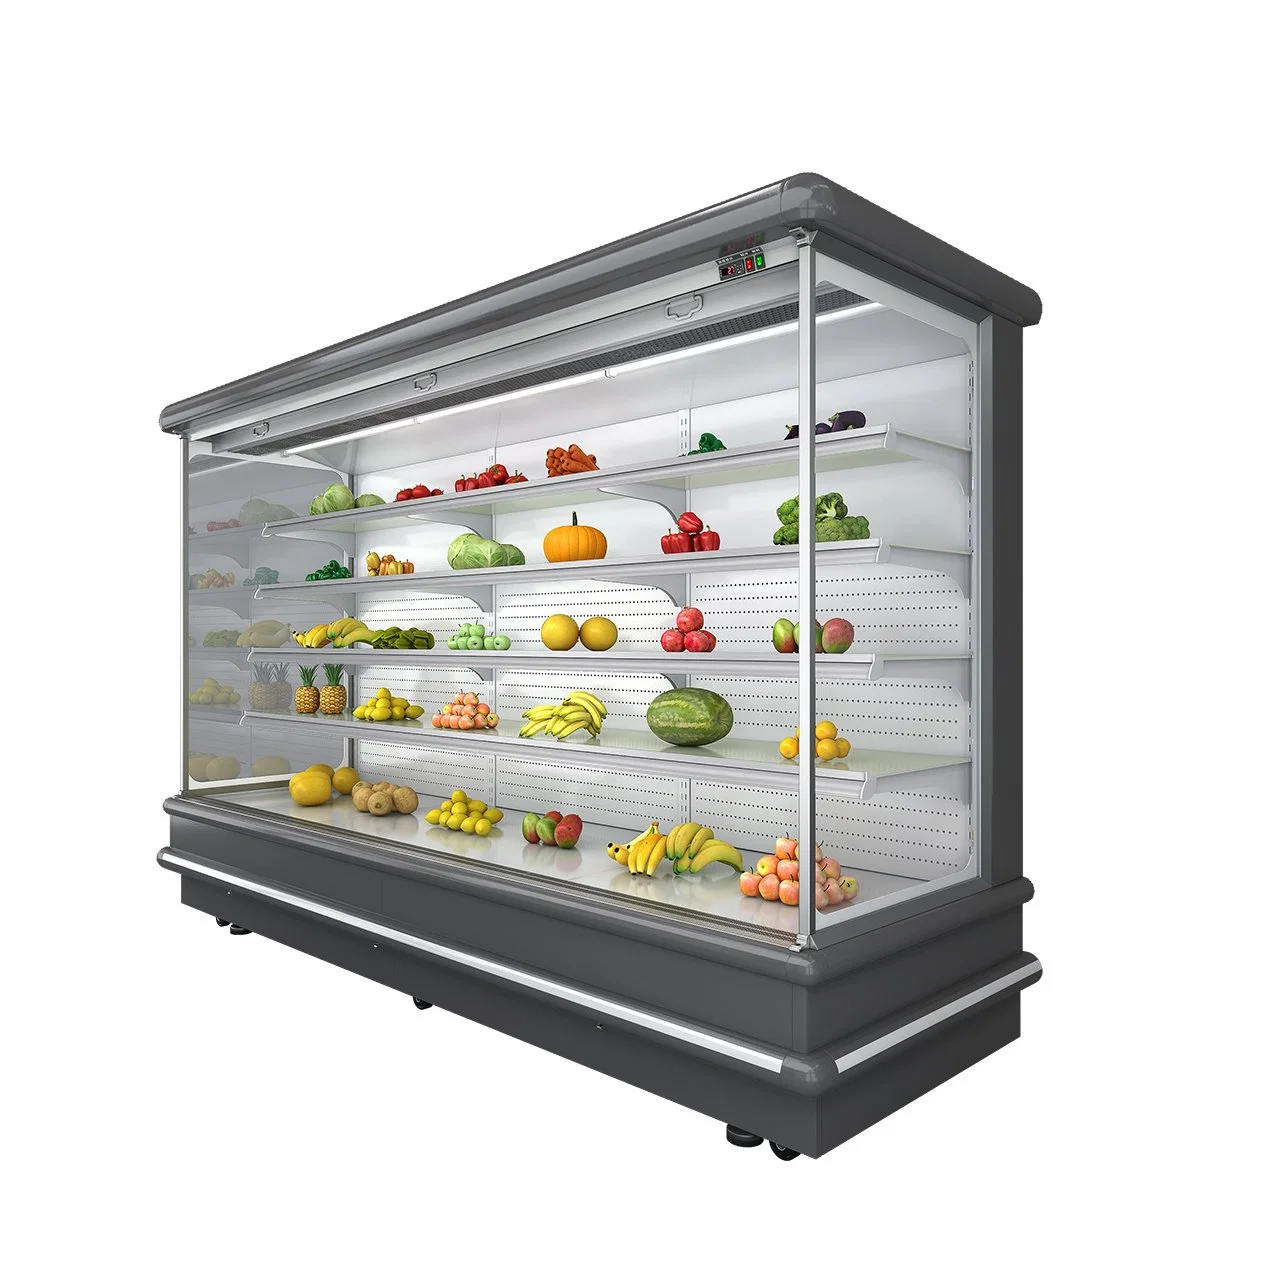 Custom Length Multi-Deck Chiller Closed Cooler Commercial Refrigerator for Supermarket and Store